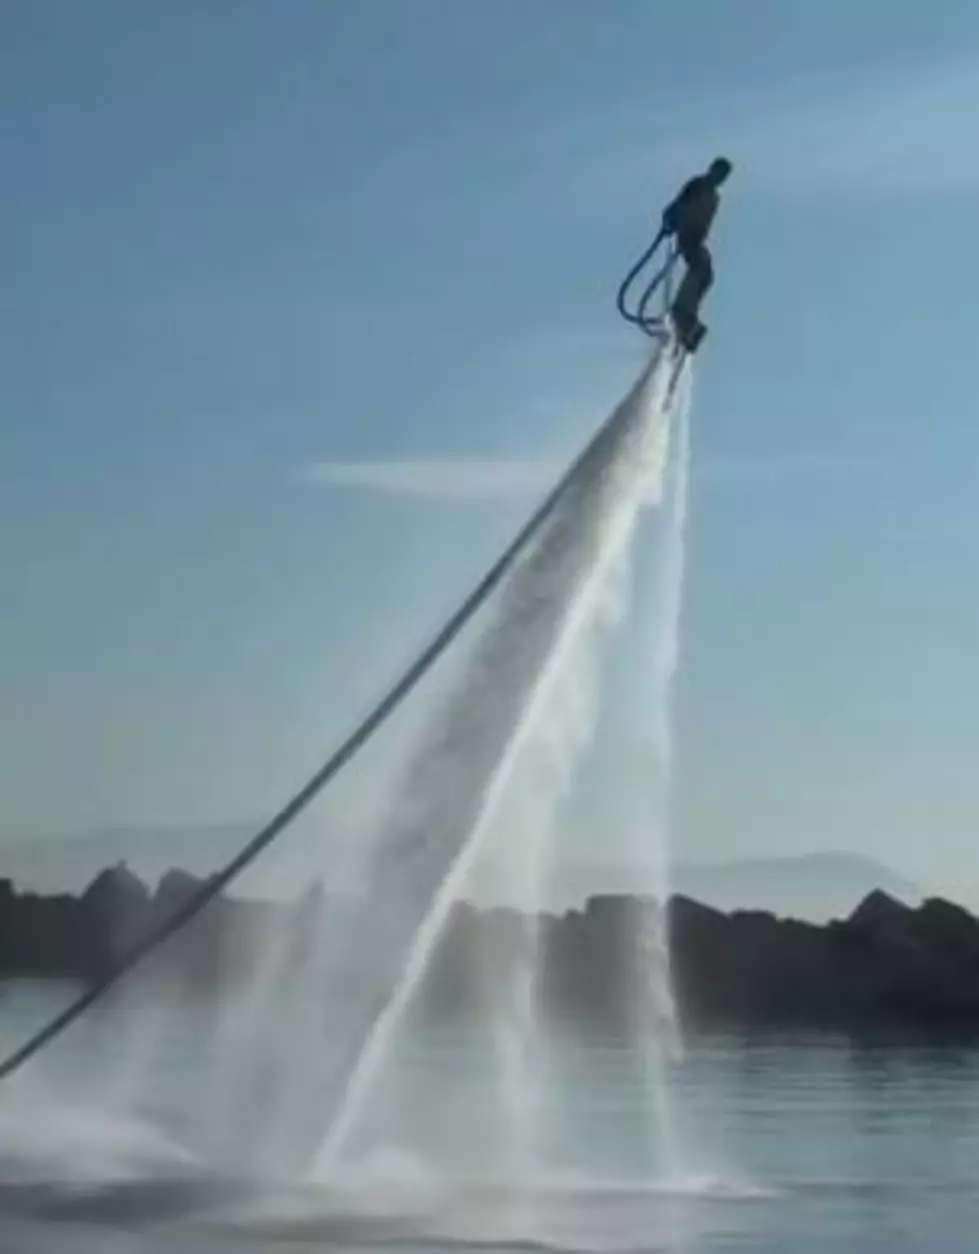 Yet Another Thing To Do On The Water! Flyboarding?